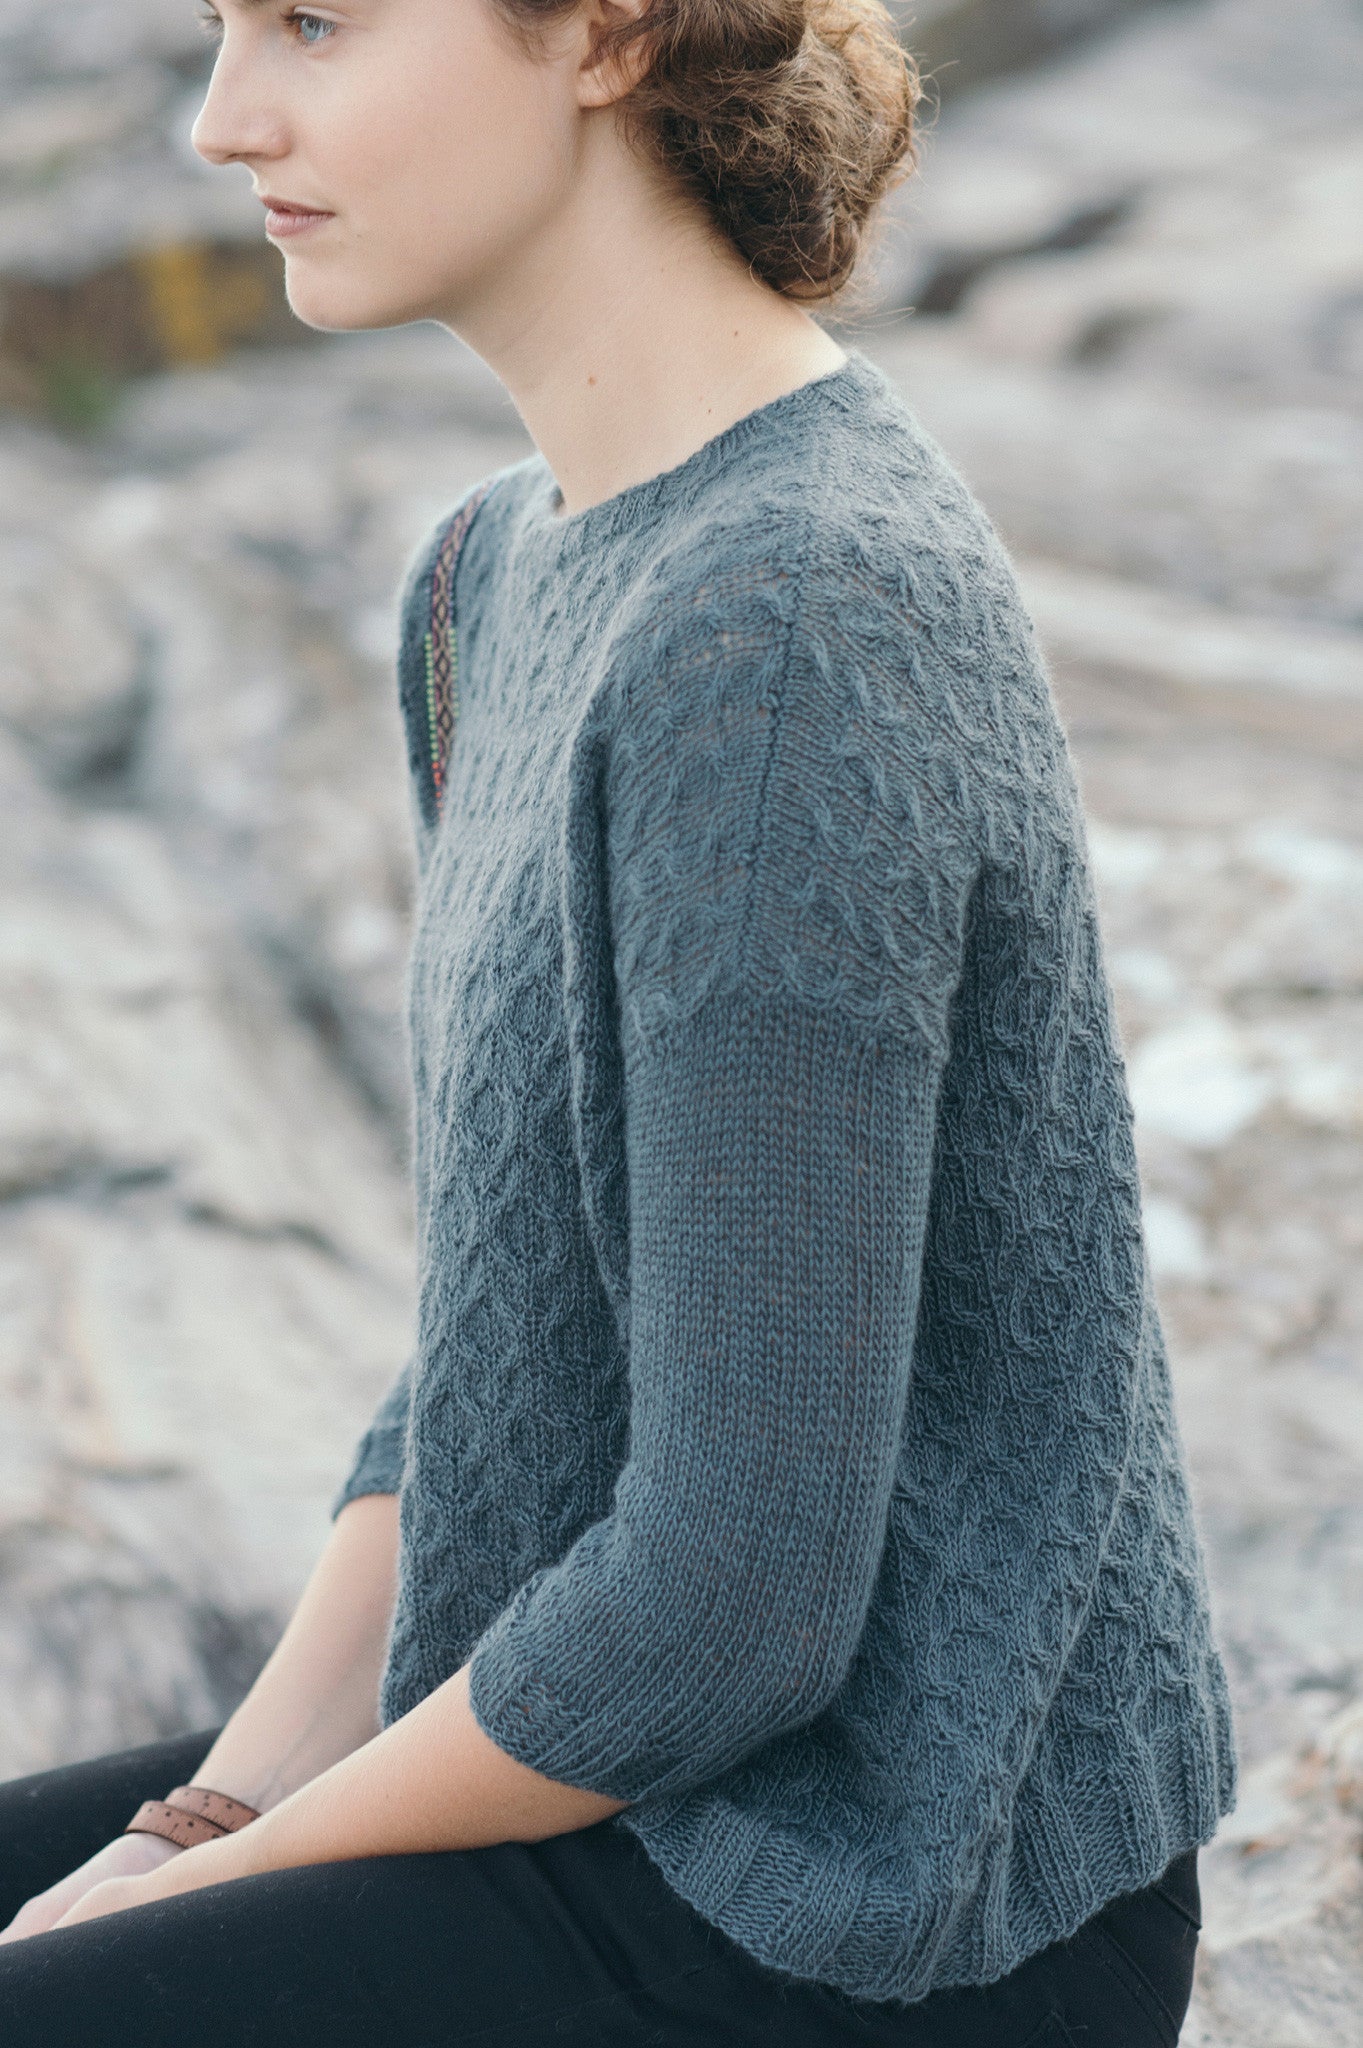 watershed knitting pattern – Quince & Co.